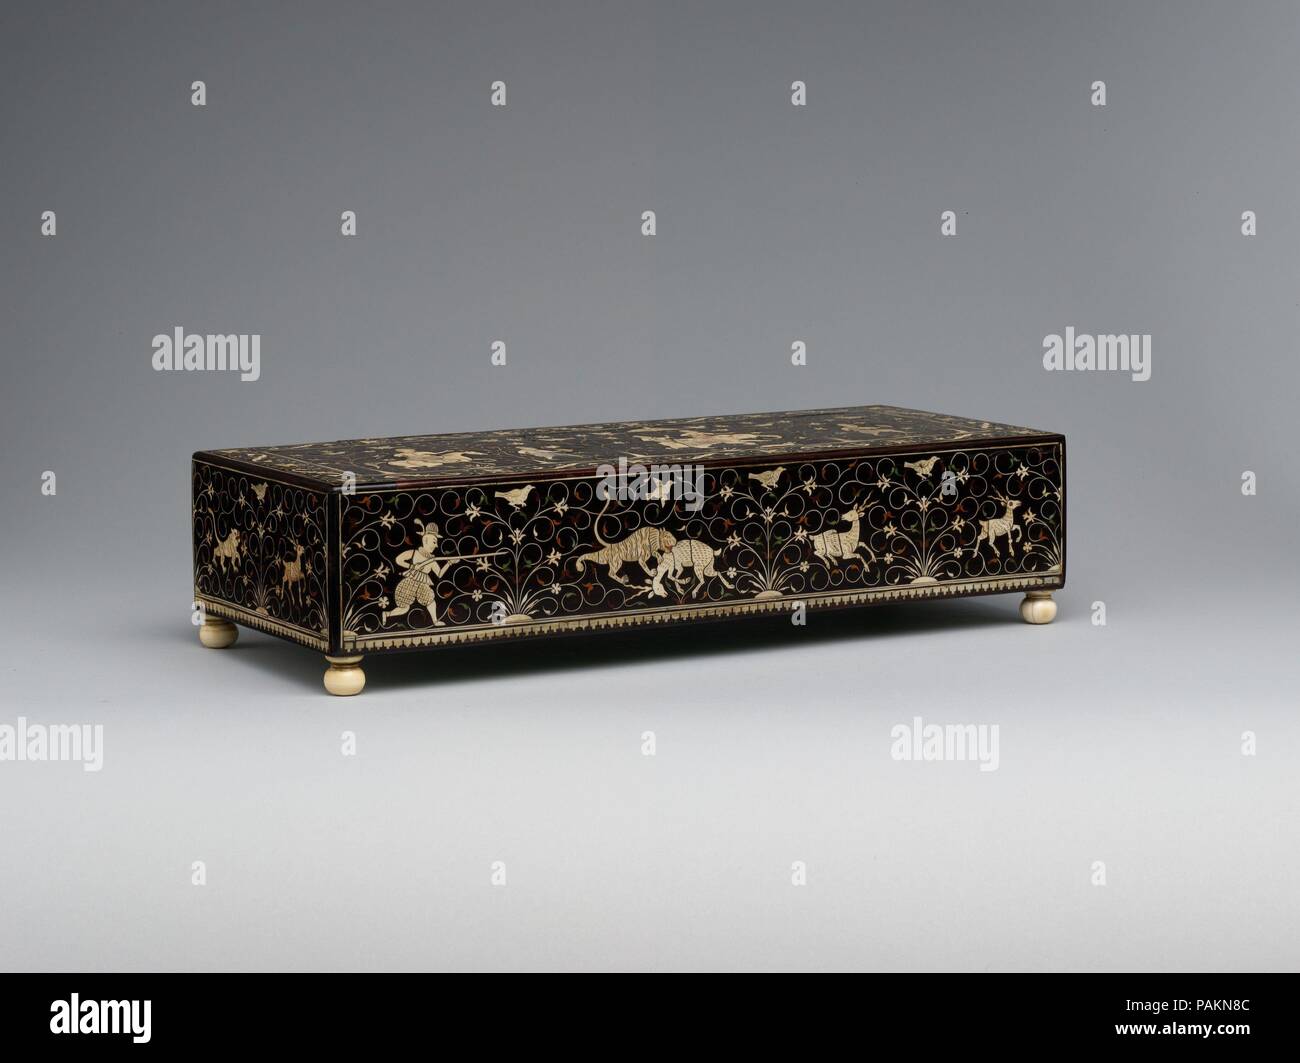 Inlaid Box for the Portuguese Market. Dimensions: H. 3 1/4 in. (8.3 cm)  W. 13 1/2 in. (34.3 cm)  D. 5 11/16 in. (14.5 cm)  Wt. 40.2 oz. (1139.8 g). Date: ca.1600.  From the late sixteenth century onward, Mughal India actively exported goods to Europe, particularly to Portugal, where such inlaid work was treasured. While many Europeanizing elements are evident in the decoration of this box, the hunting scenes were originally inspired by Persian compositions, which had in turn become popular in Mughal painting. The undulating branches of the bird-filled trees against which the European hunters  Stock Photo